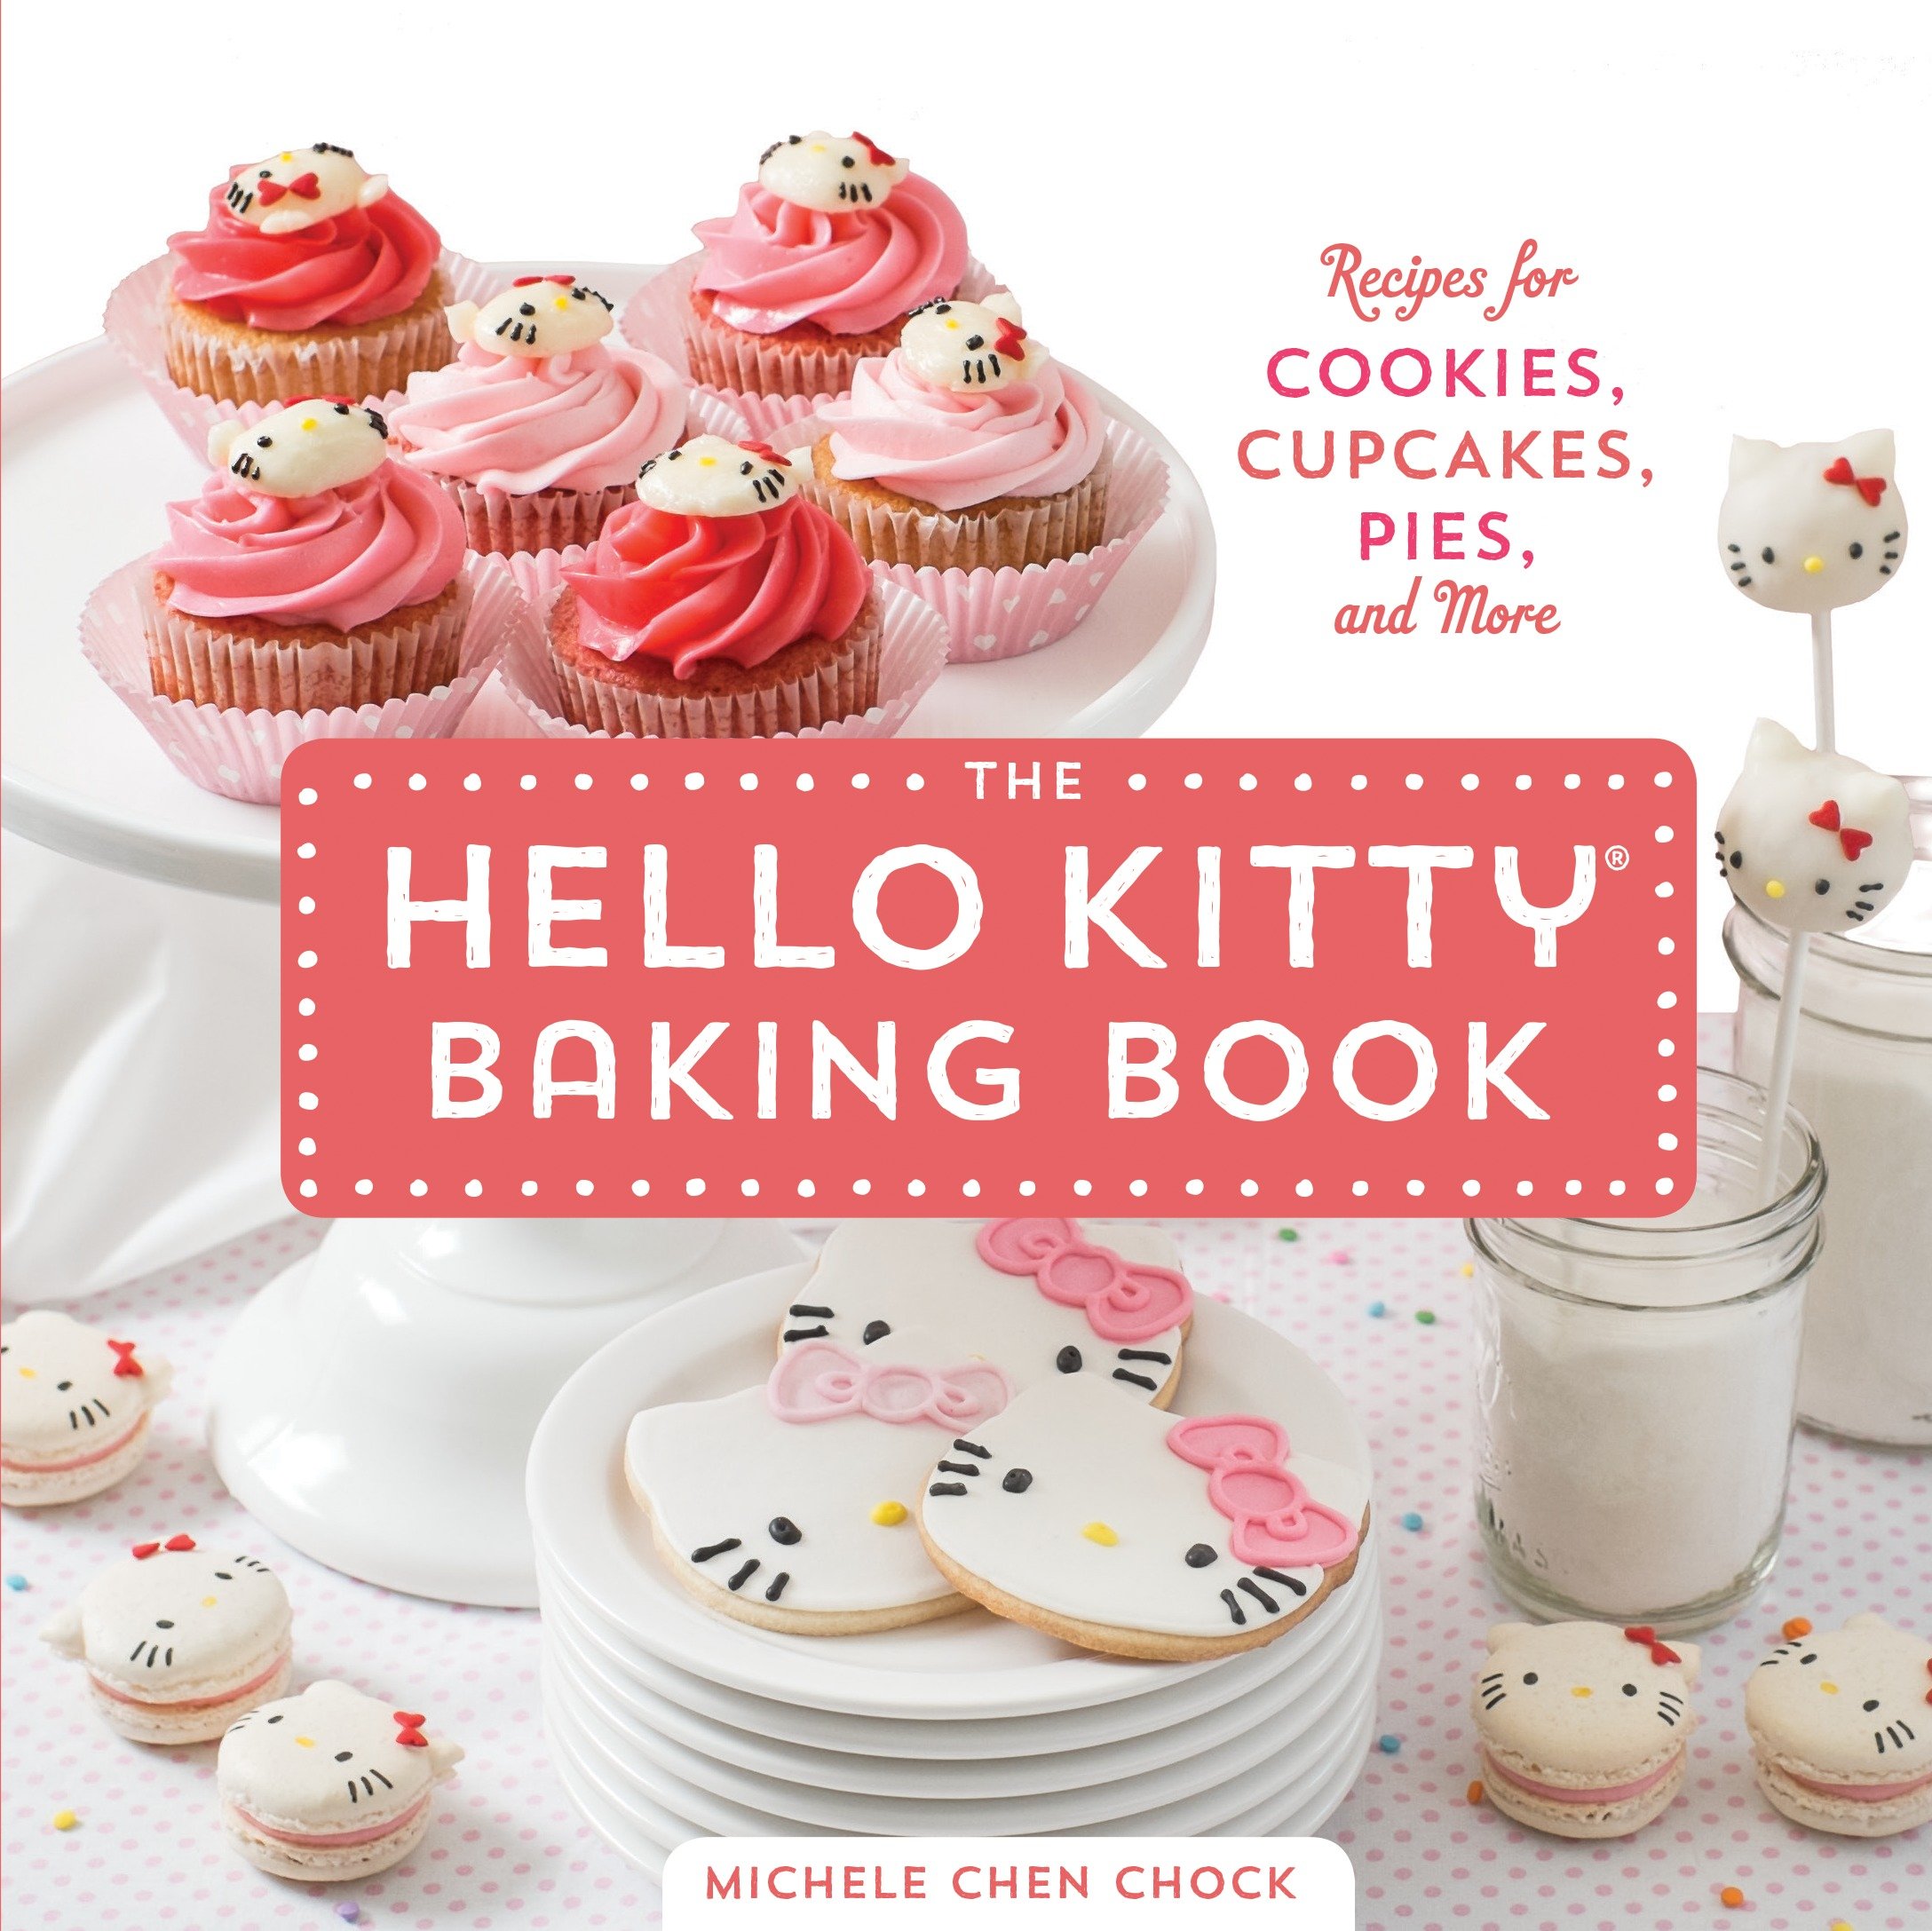 The Hello Kitty baking book : recipes for cookies, cupcakes, pies, and more